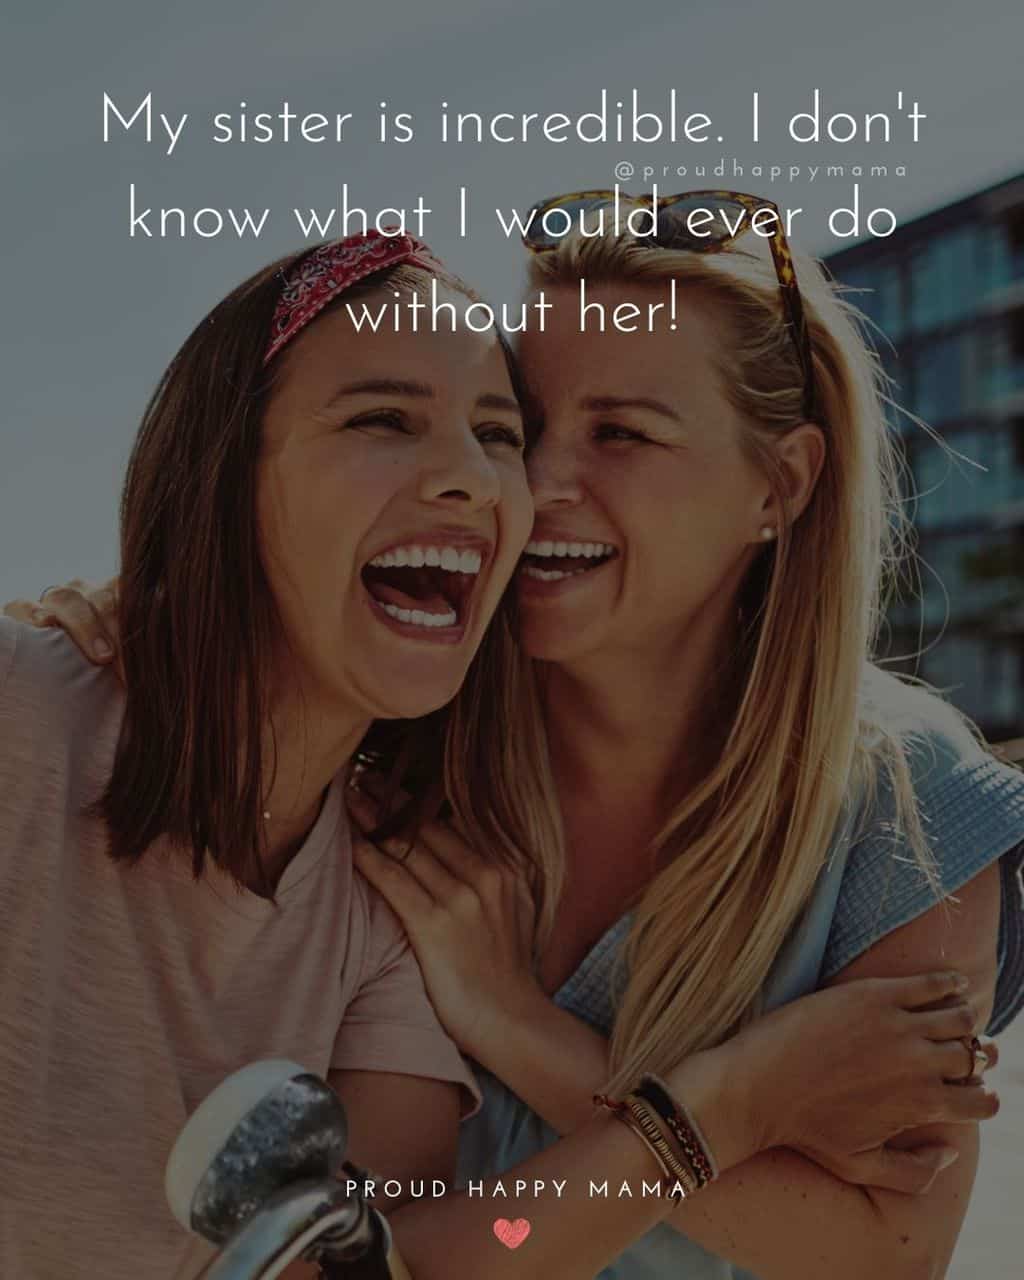 Sister love quotes - My sister is incredible. I dont know what I would ever do without her!